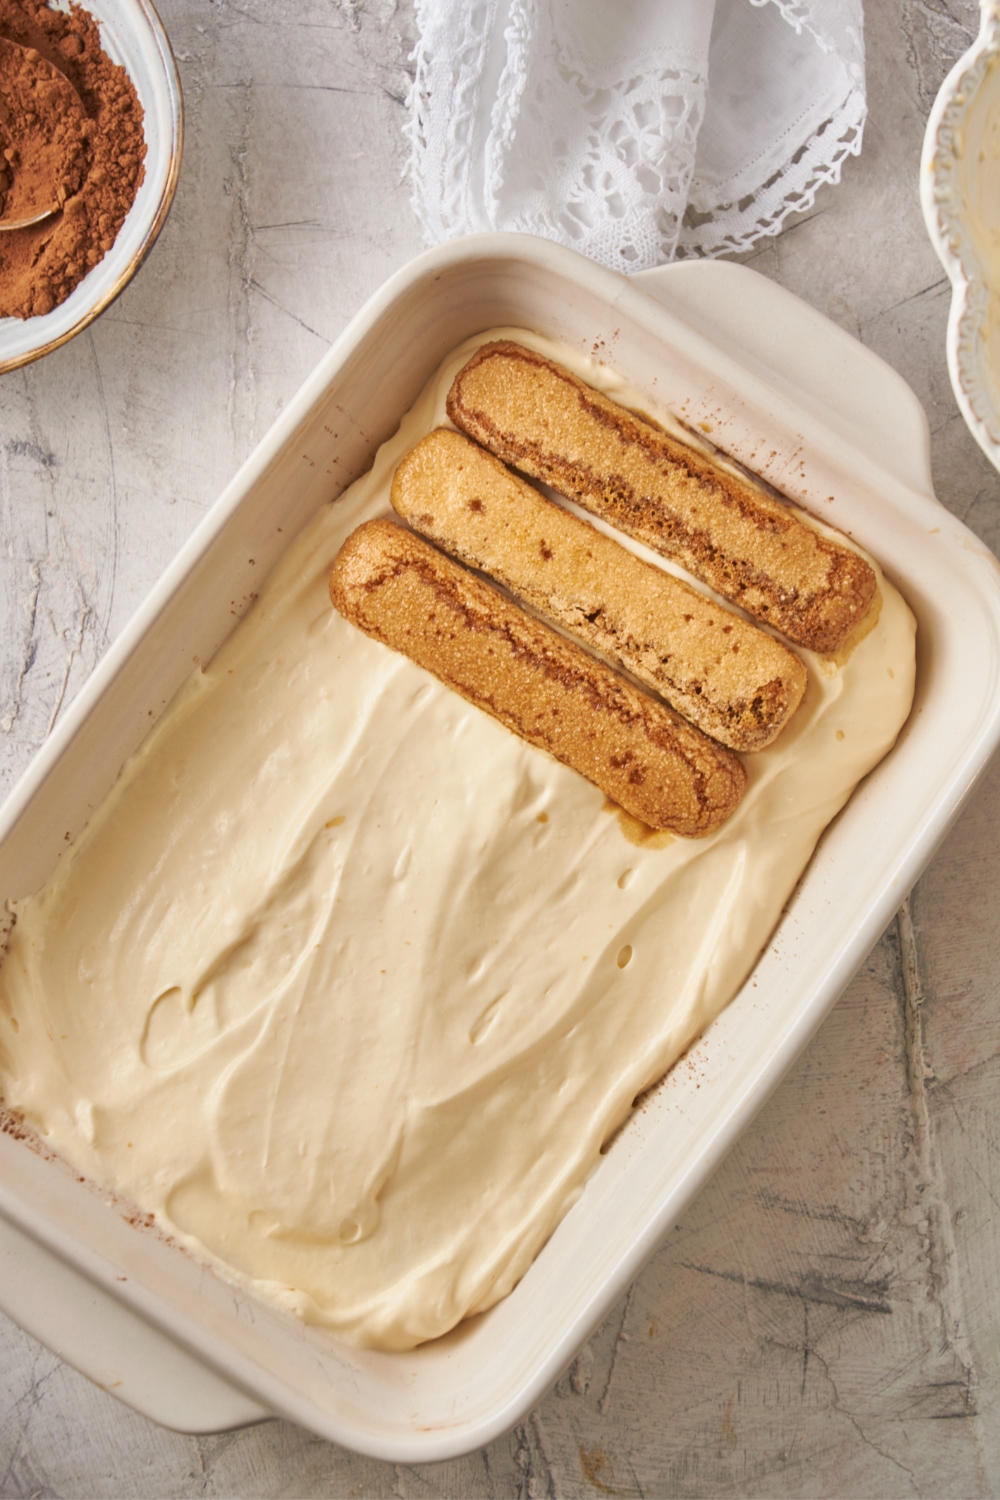 A pan with a layer of ladyfingers and custard; another layer of ladyfingers is being added.